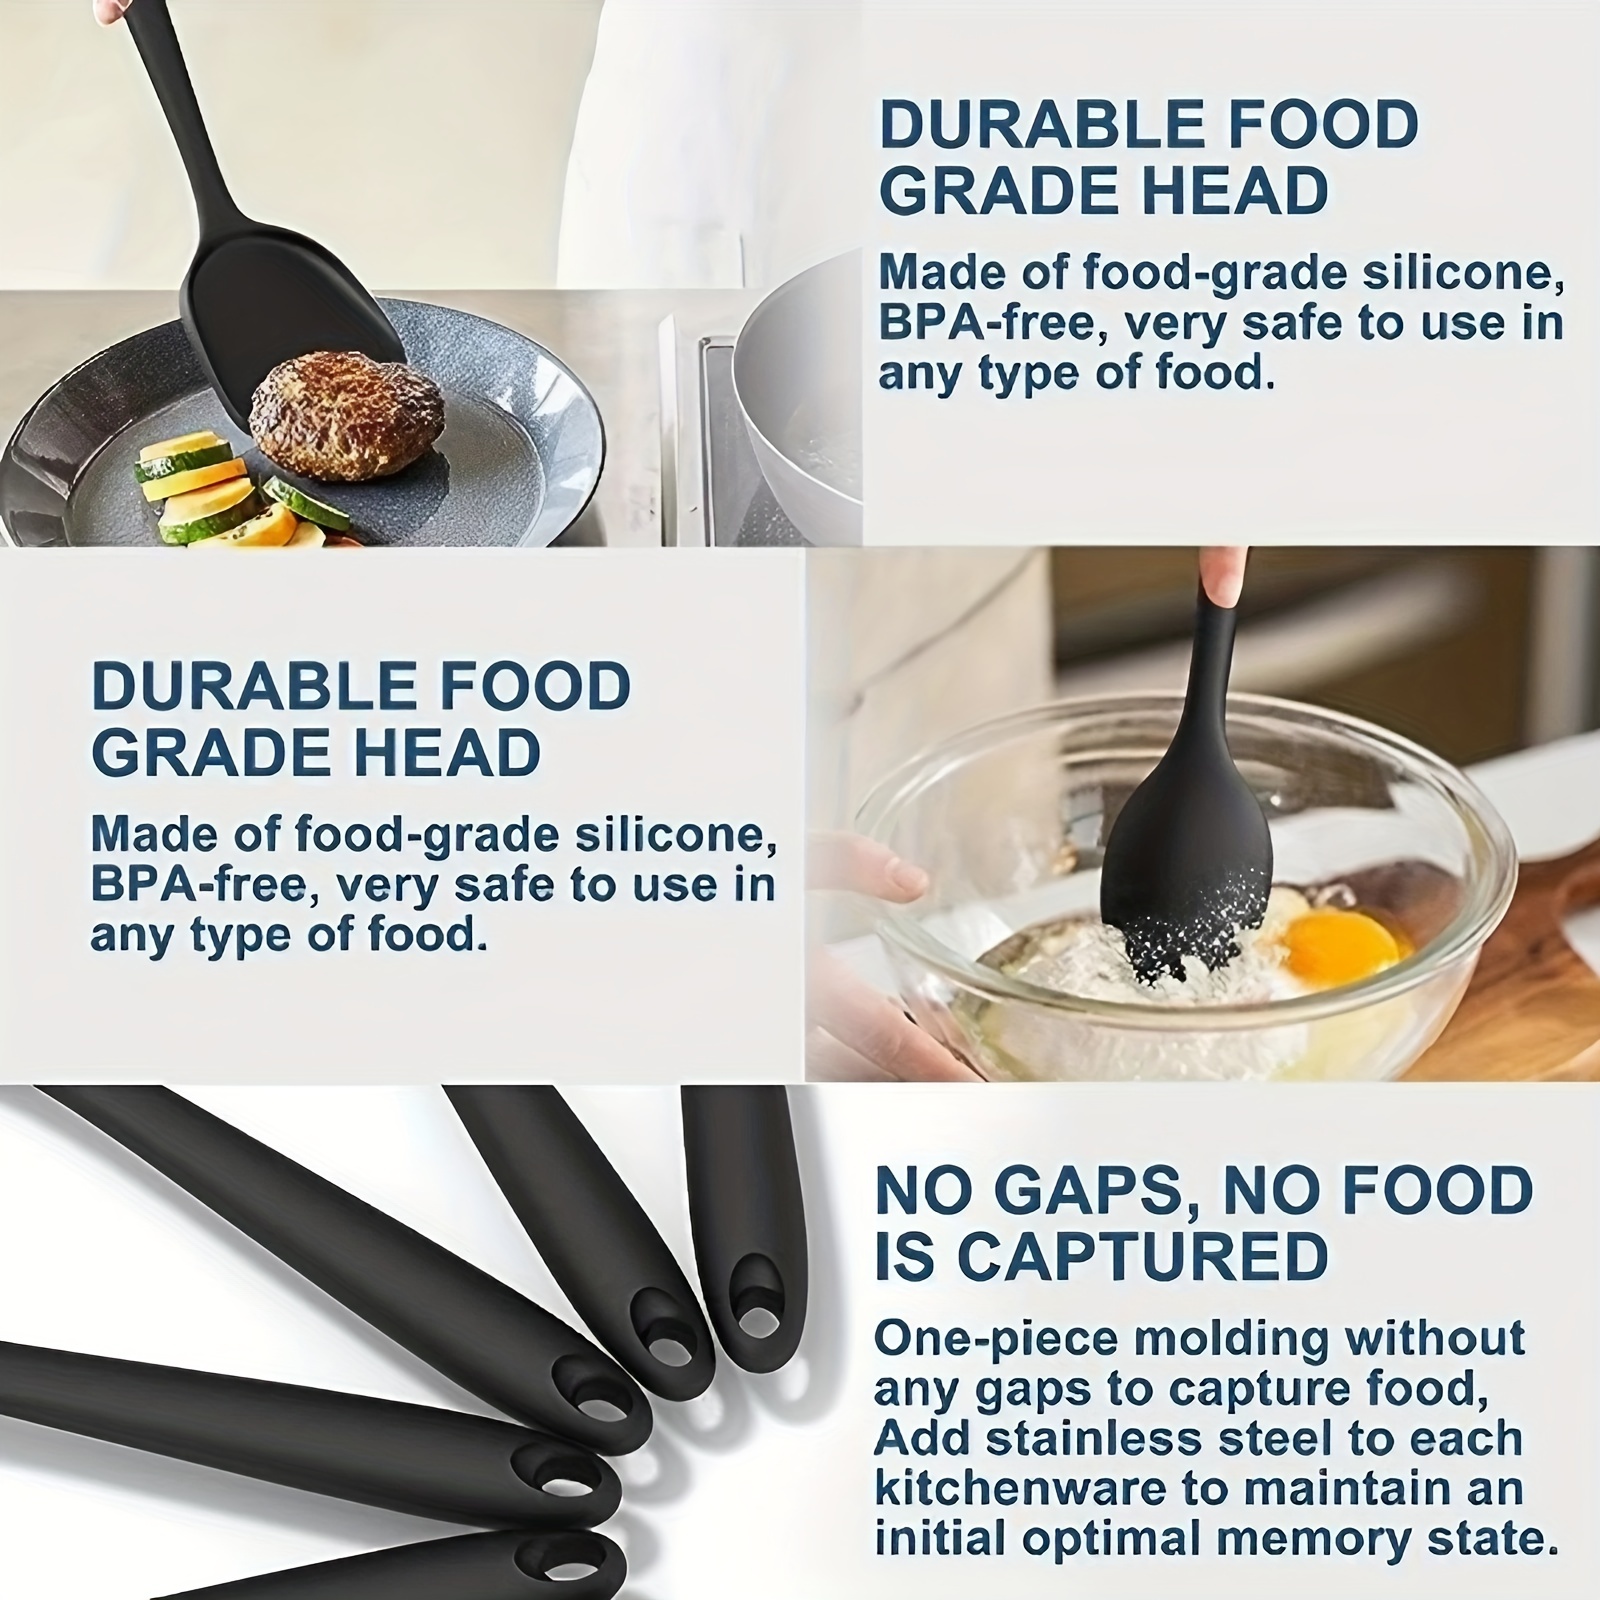 The Best Kitchen Utensil Sets For Every Kitchen (As Recommended